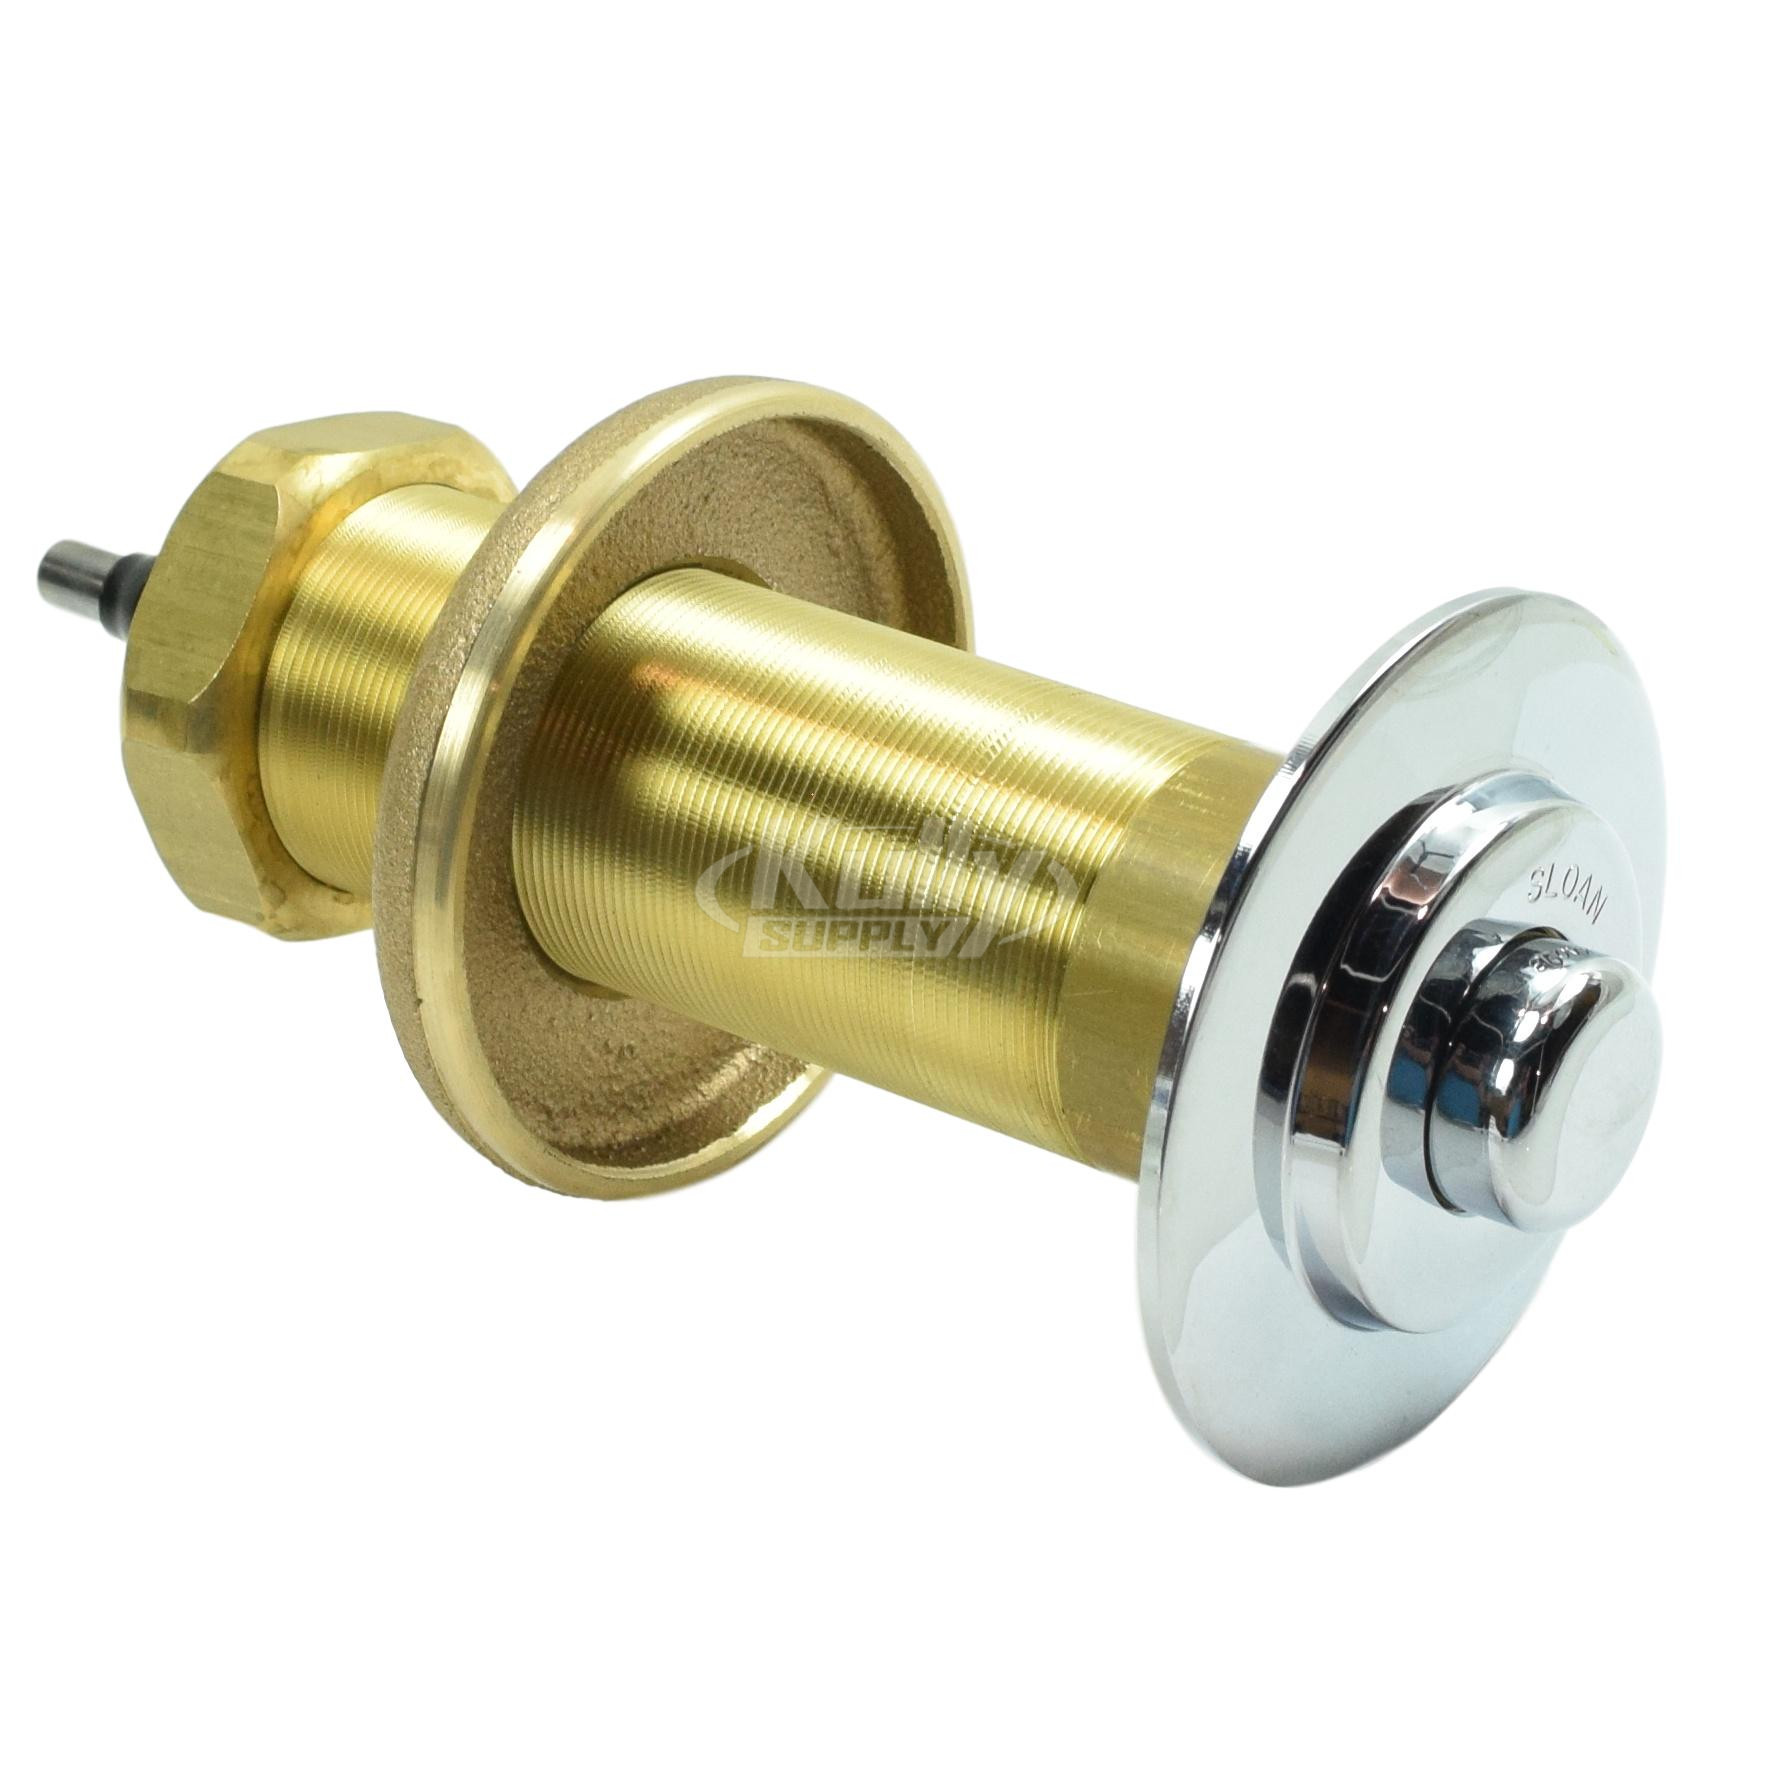 Sloan C-9-A Push Button Assembly for 2" Wall Depth (4-3/4" L-Dimension)